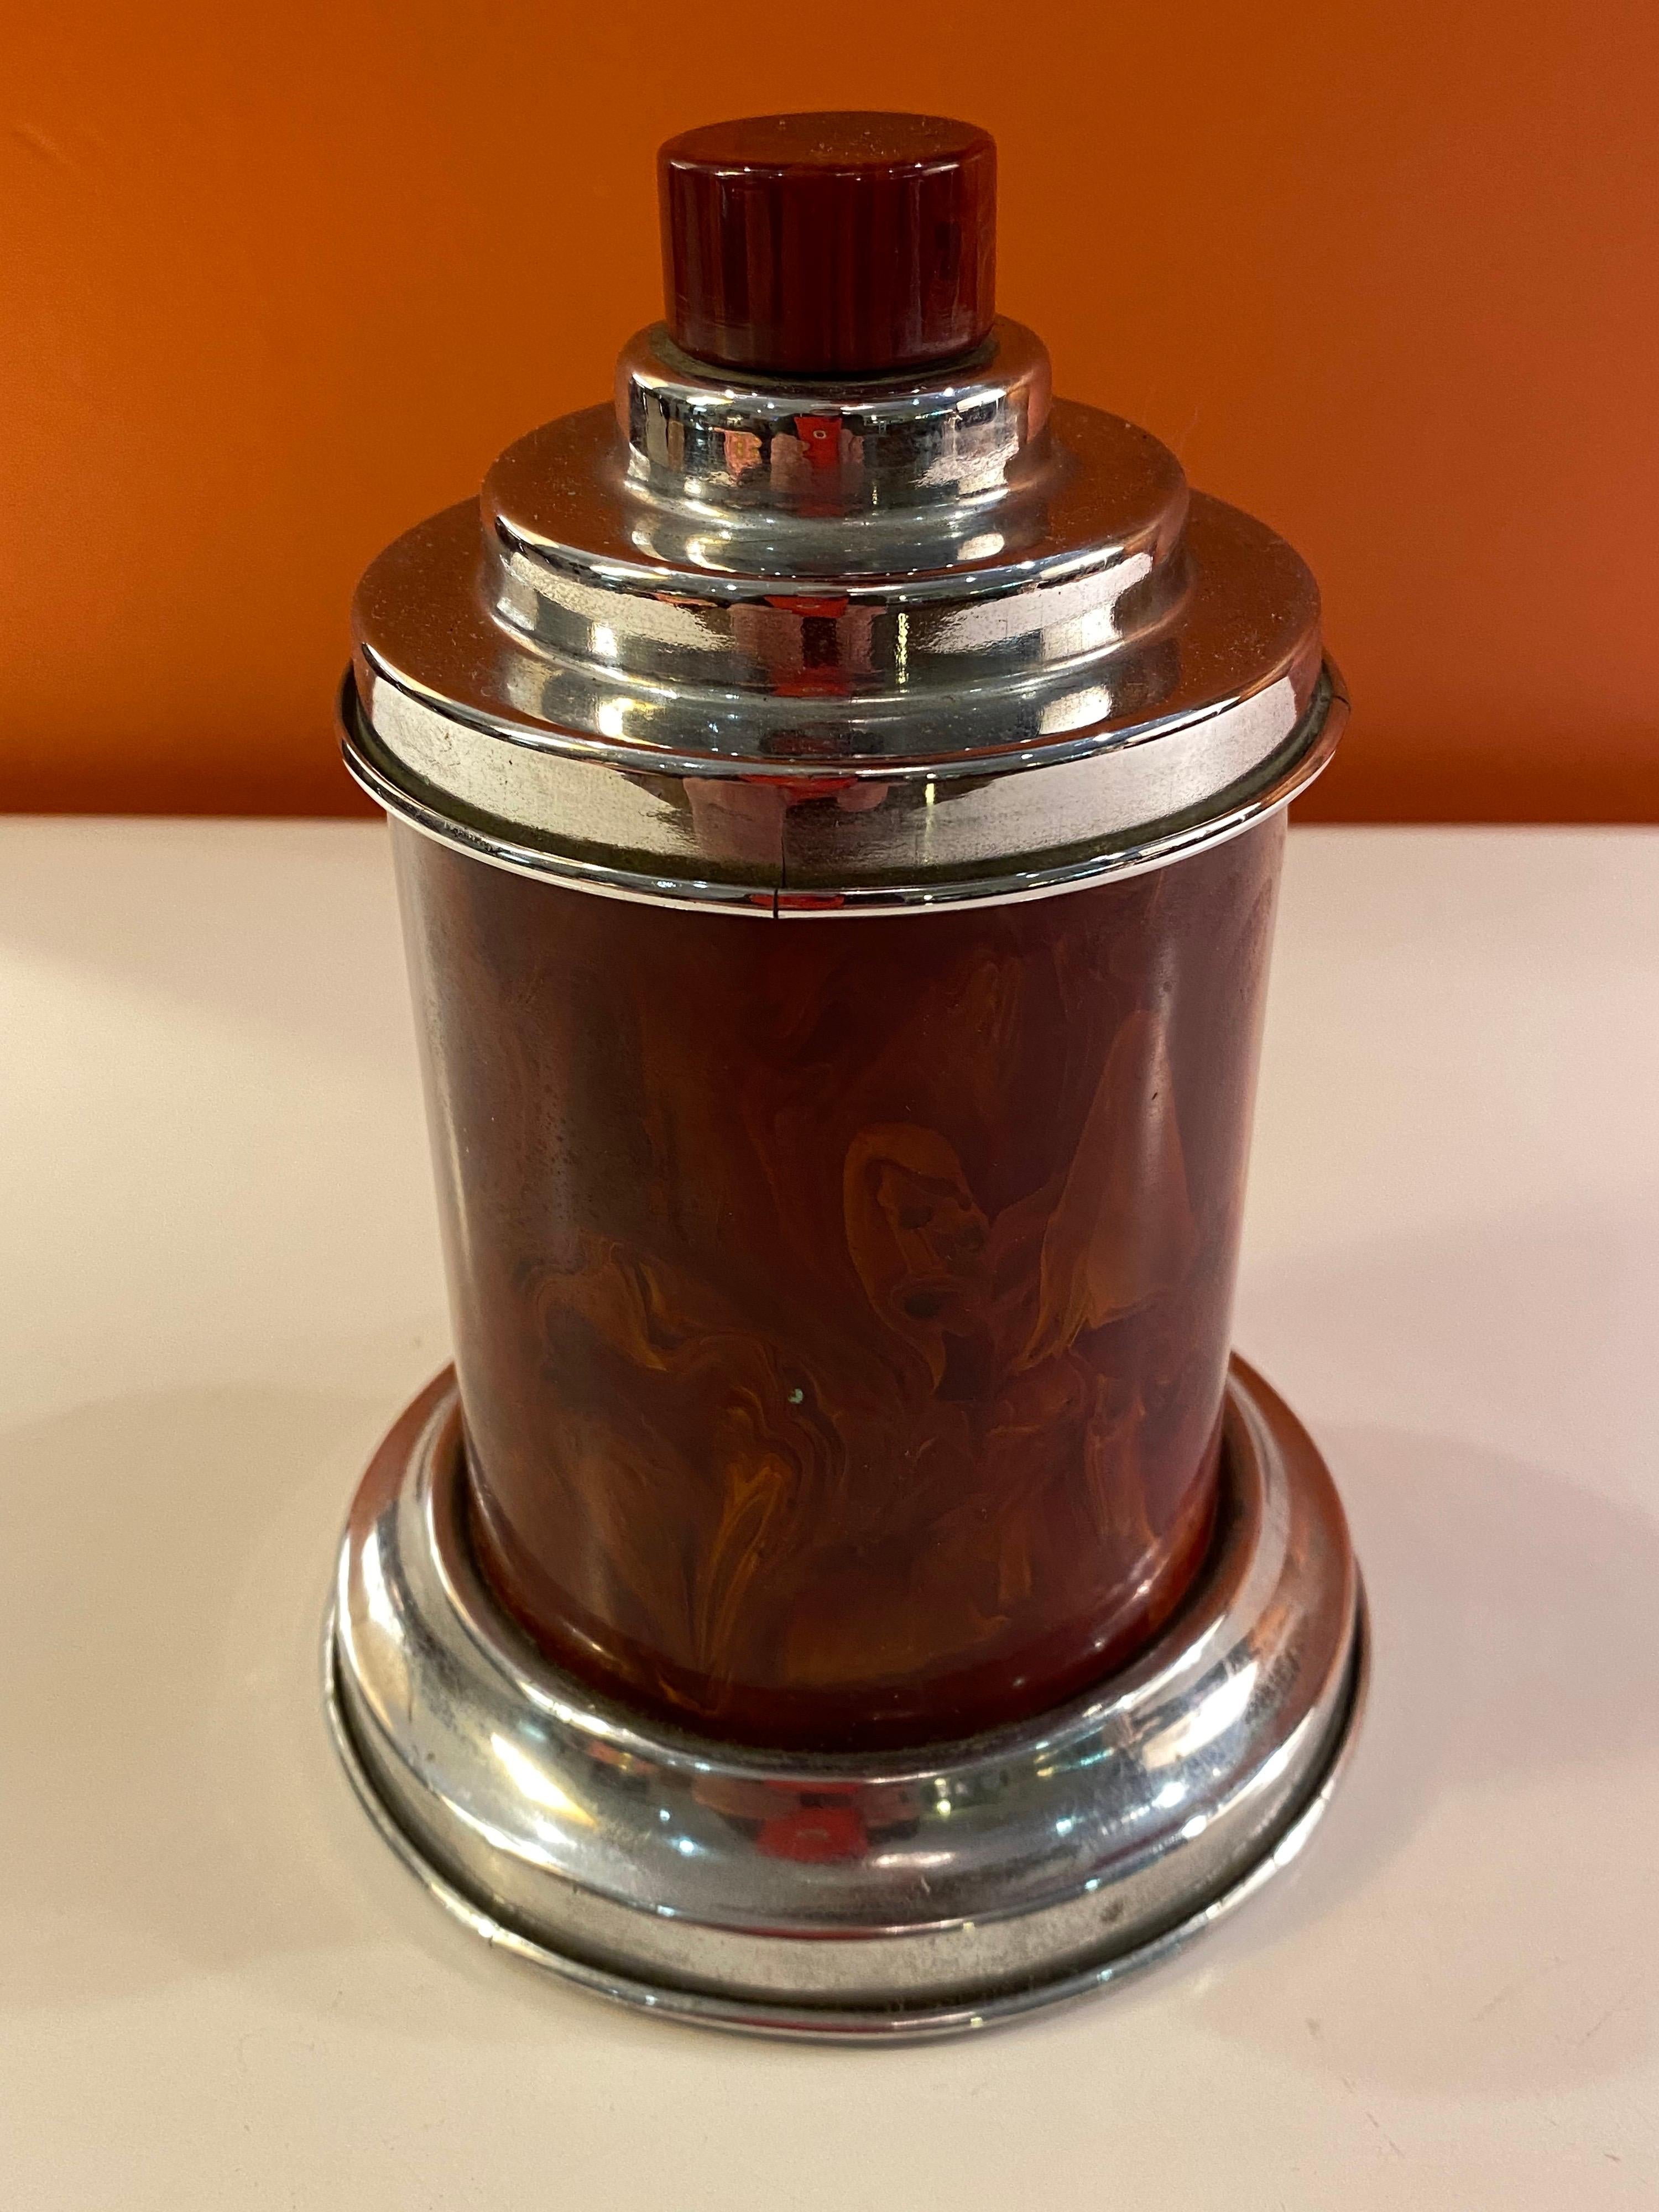 Round red Bakelite cigarette dispenser. Unique design, to open pull up on top red Bakelite Knob to reveal chrome stems that hold your cigarettes. Very nice original condition. More often found in a butterscotch color. Red is an uncommon example.